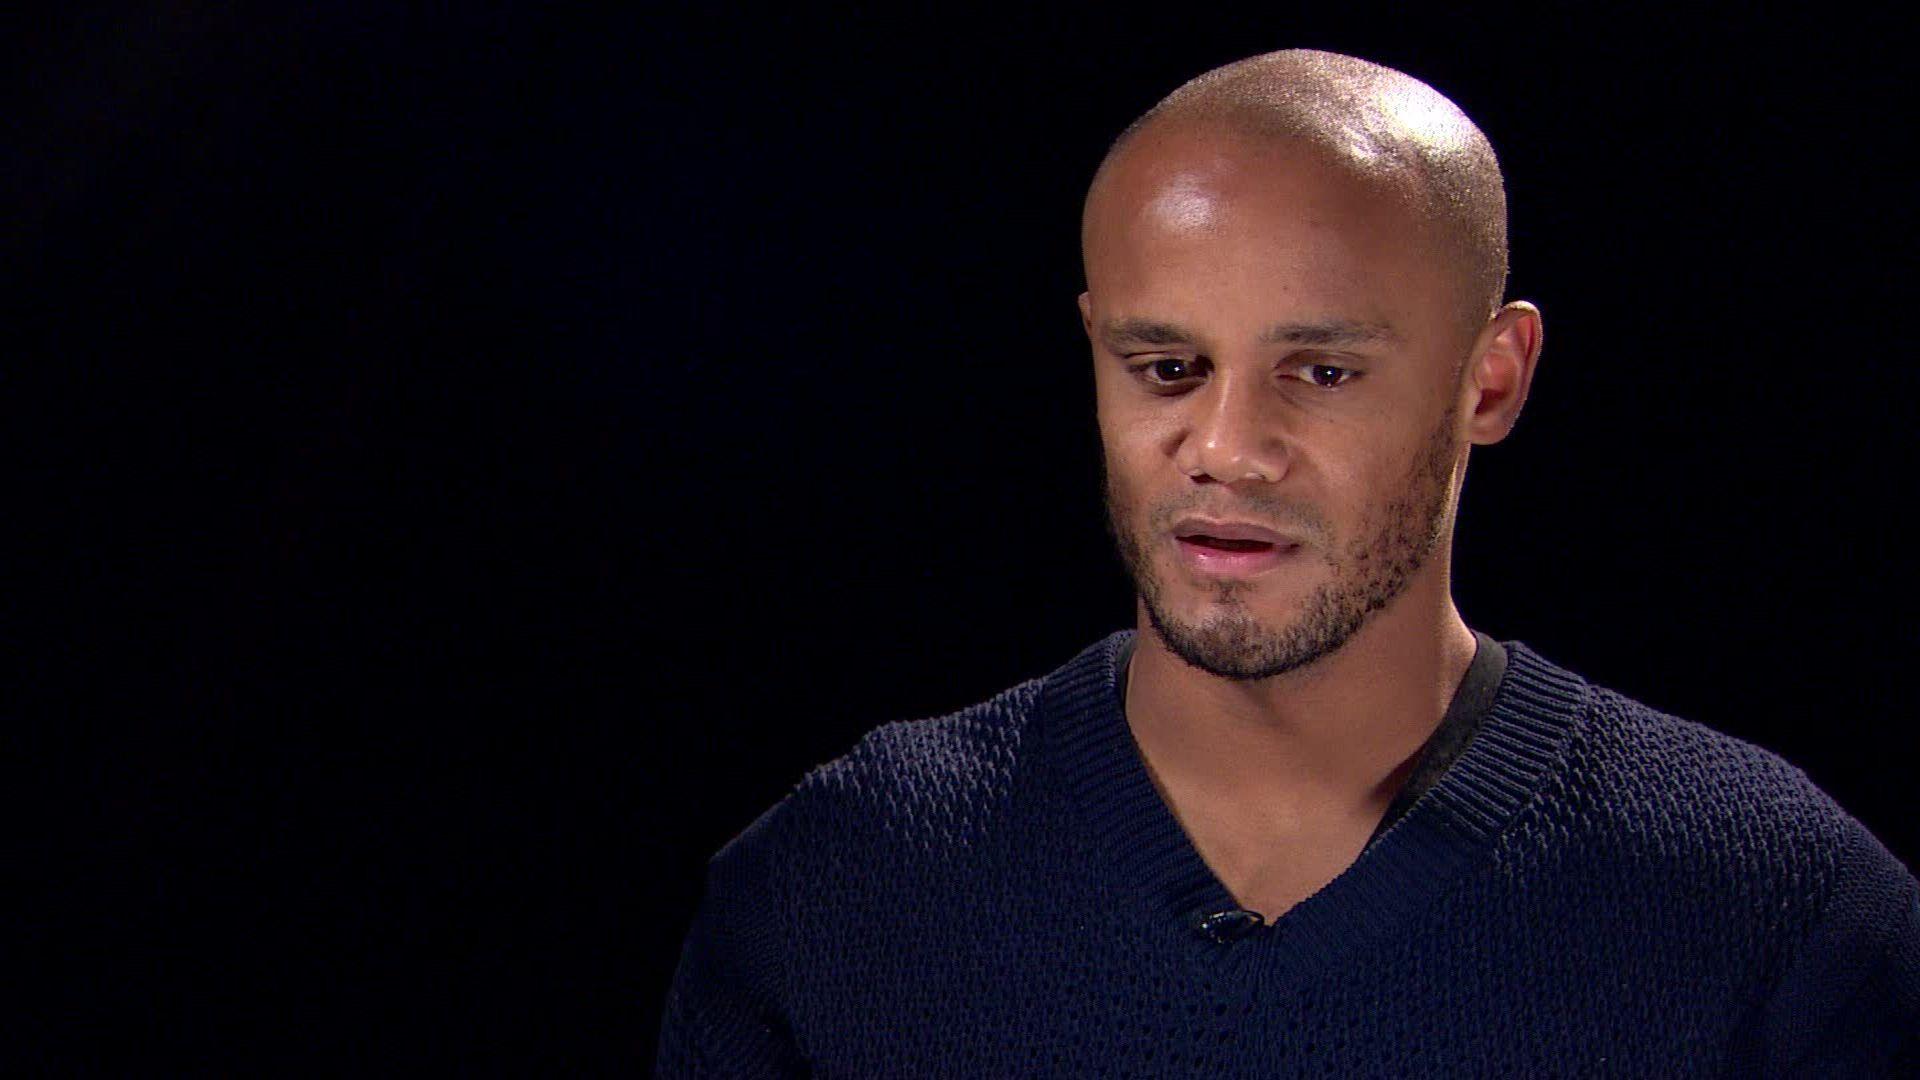 Watch the full Vincent Kompany interview